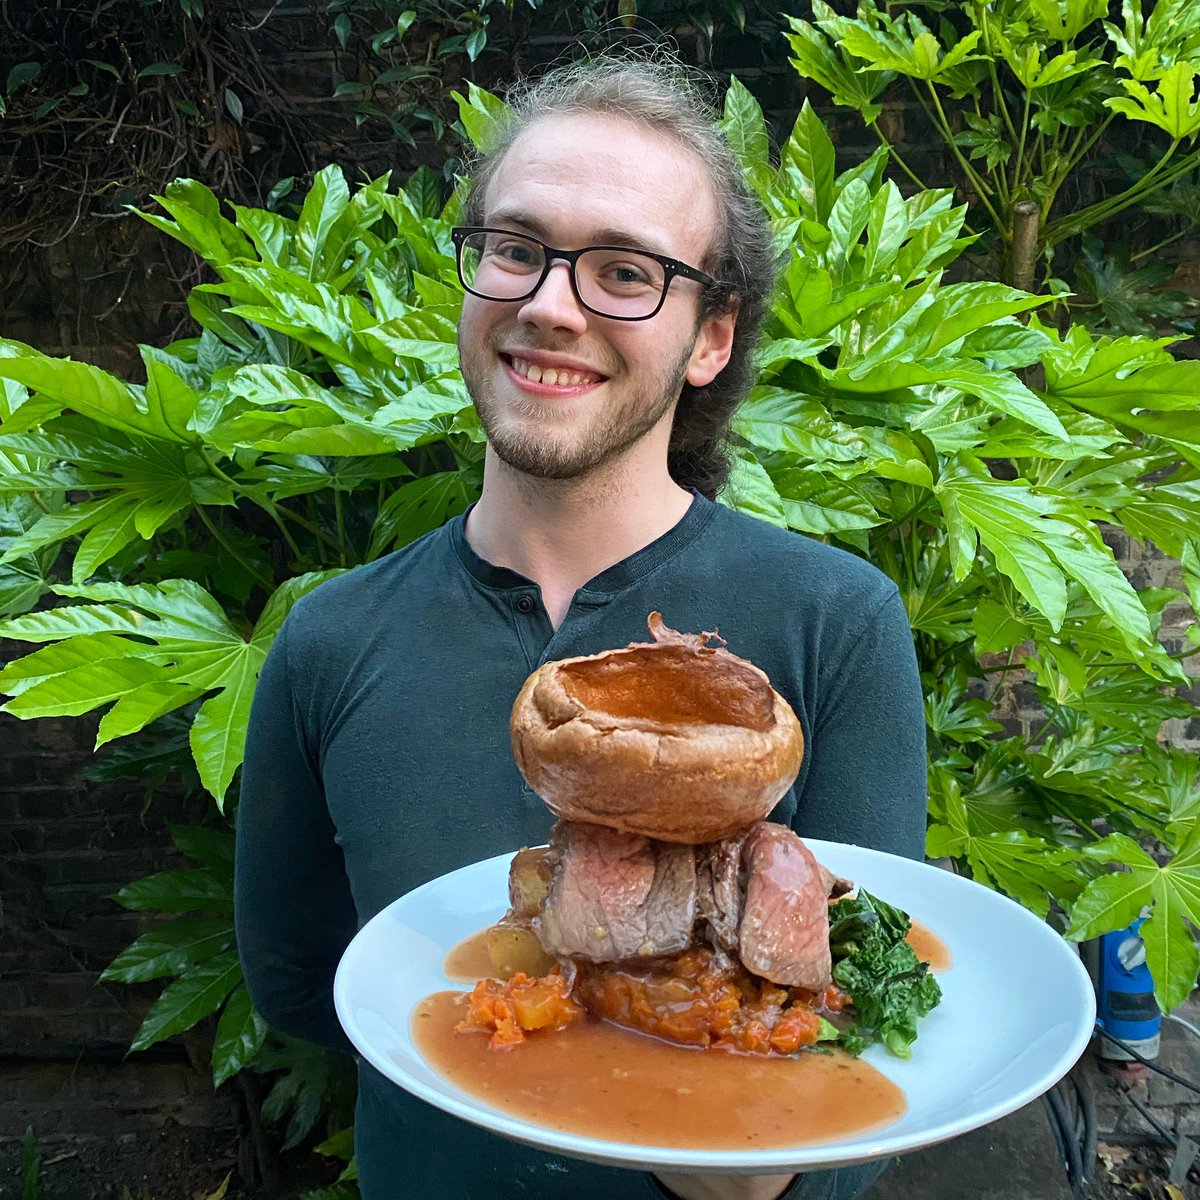 We hope you had a lovely bank holiday Sunday Check out our gorgeous beef roast dinner🤤

Available every Sunday from 12pm. We hope to see you next week!🙌

@youngspubs #greenwich_uk #brewerylife #southeastlondonfood #roast #roastbeef #beergarden #publunch #pubroast